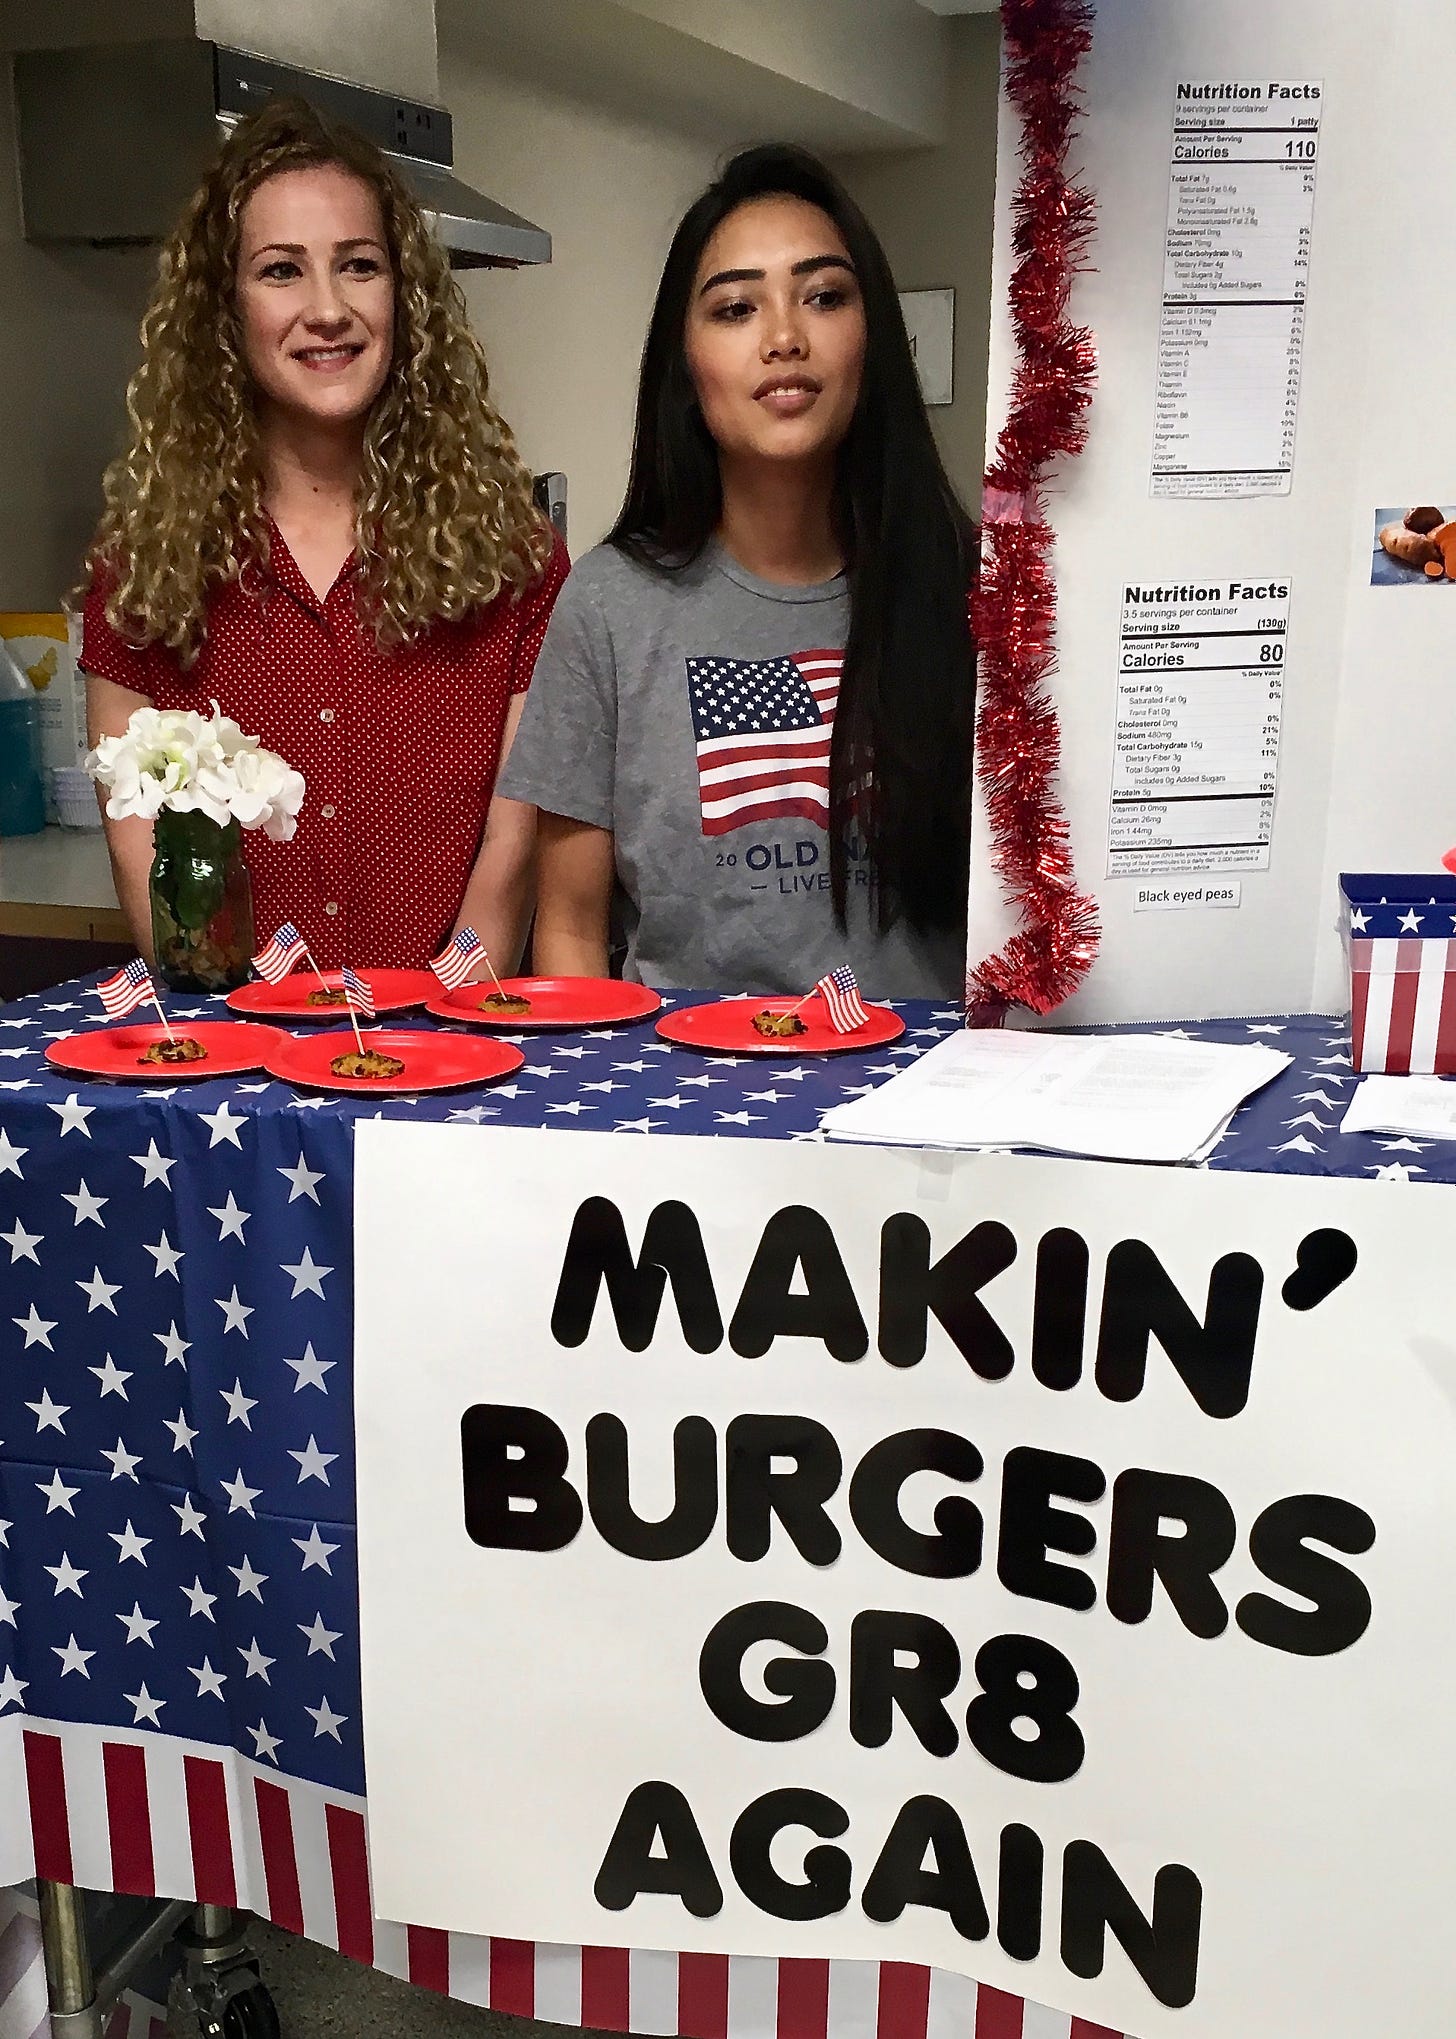 Two young women stand at a red-white-and-blue–themed table with veggie burger samples and the slogan Makin' Burgers Gr8 Again